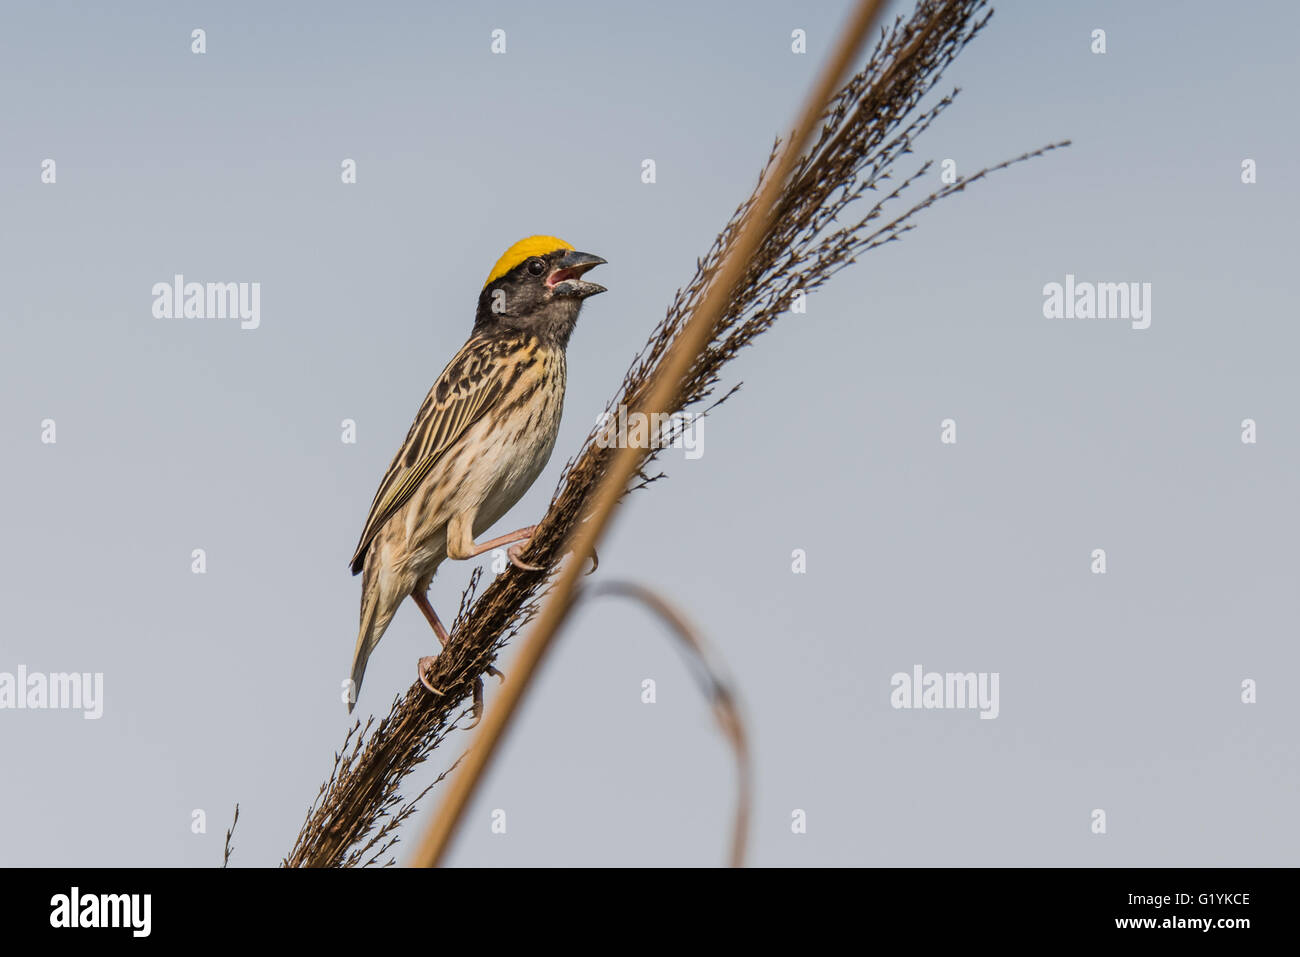 Streaked weaver perched, Ploceus manyar. The streaked weaver is a species of weaver bird found in South Asia. These are not as c Stock Photo